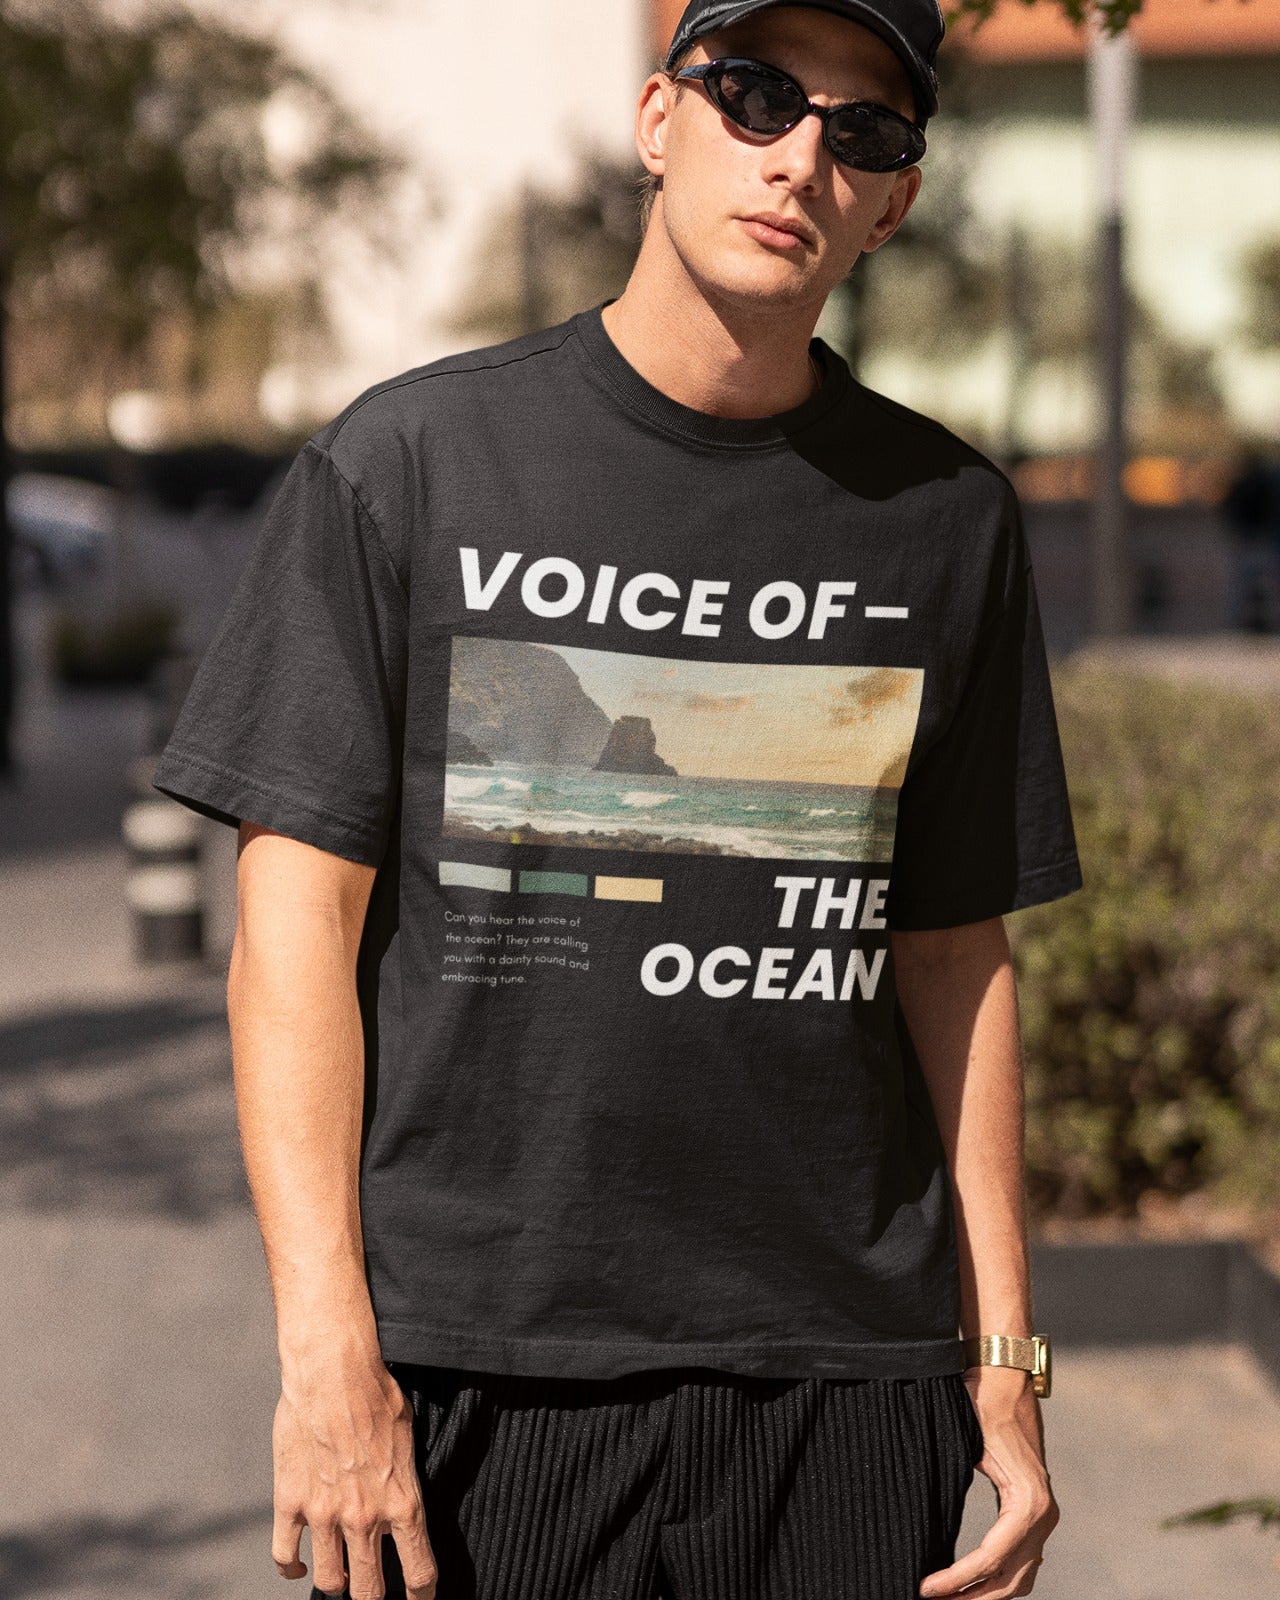 Embrace nature's beauty with our oversized black t-shirt. Featuring a serene beach and mountain view, it showcases the title "VOICE OF - THE OCEAN" to celebrate the ocean's power. Poetic words beneath read, "Can you hear the voice of the ocean? They are calling you with a dainty sound and embracing tune," creating a harmonious connection with nature. Crafted with premium materials, this t-shirt offers both comfort and style, expressing your love for the ocean's enchanting melody.